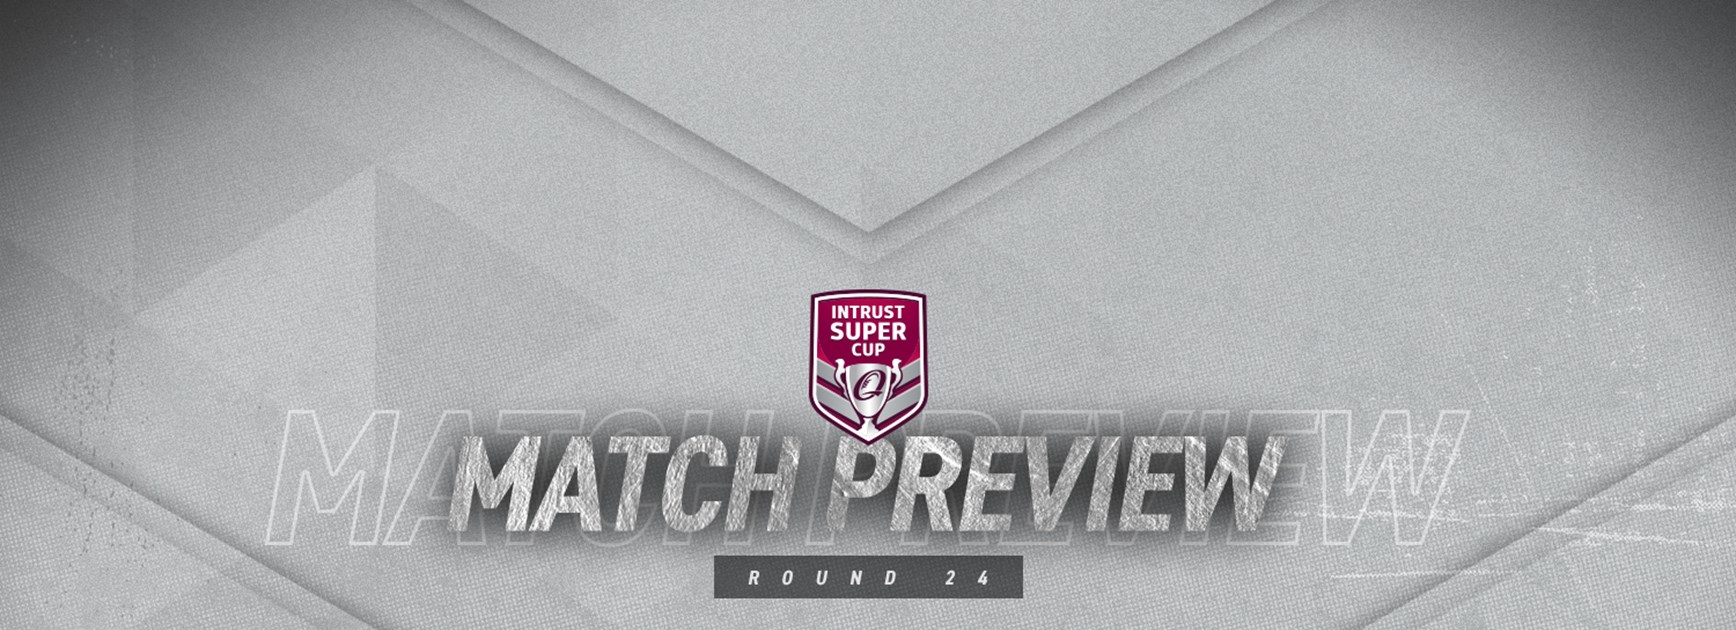 Intrust Super Cup Round 24 Preview: Turn to Me